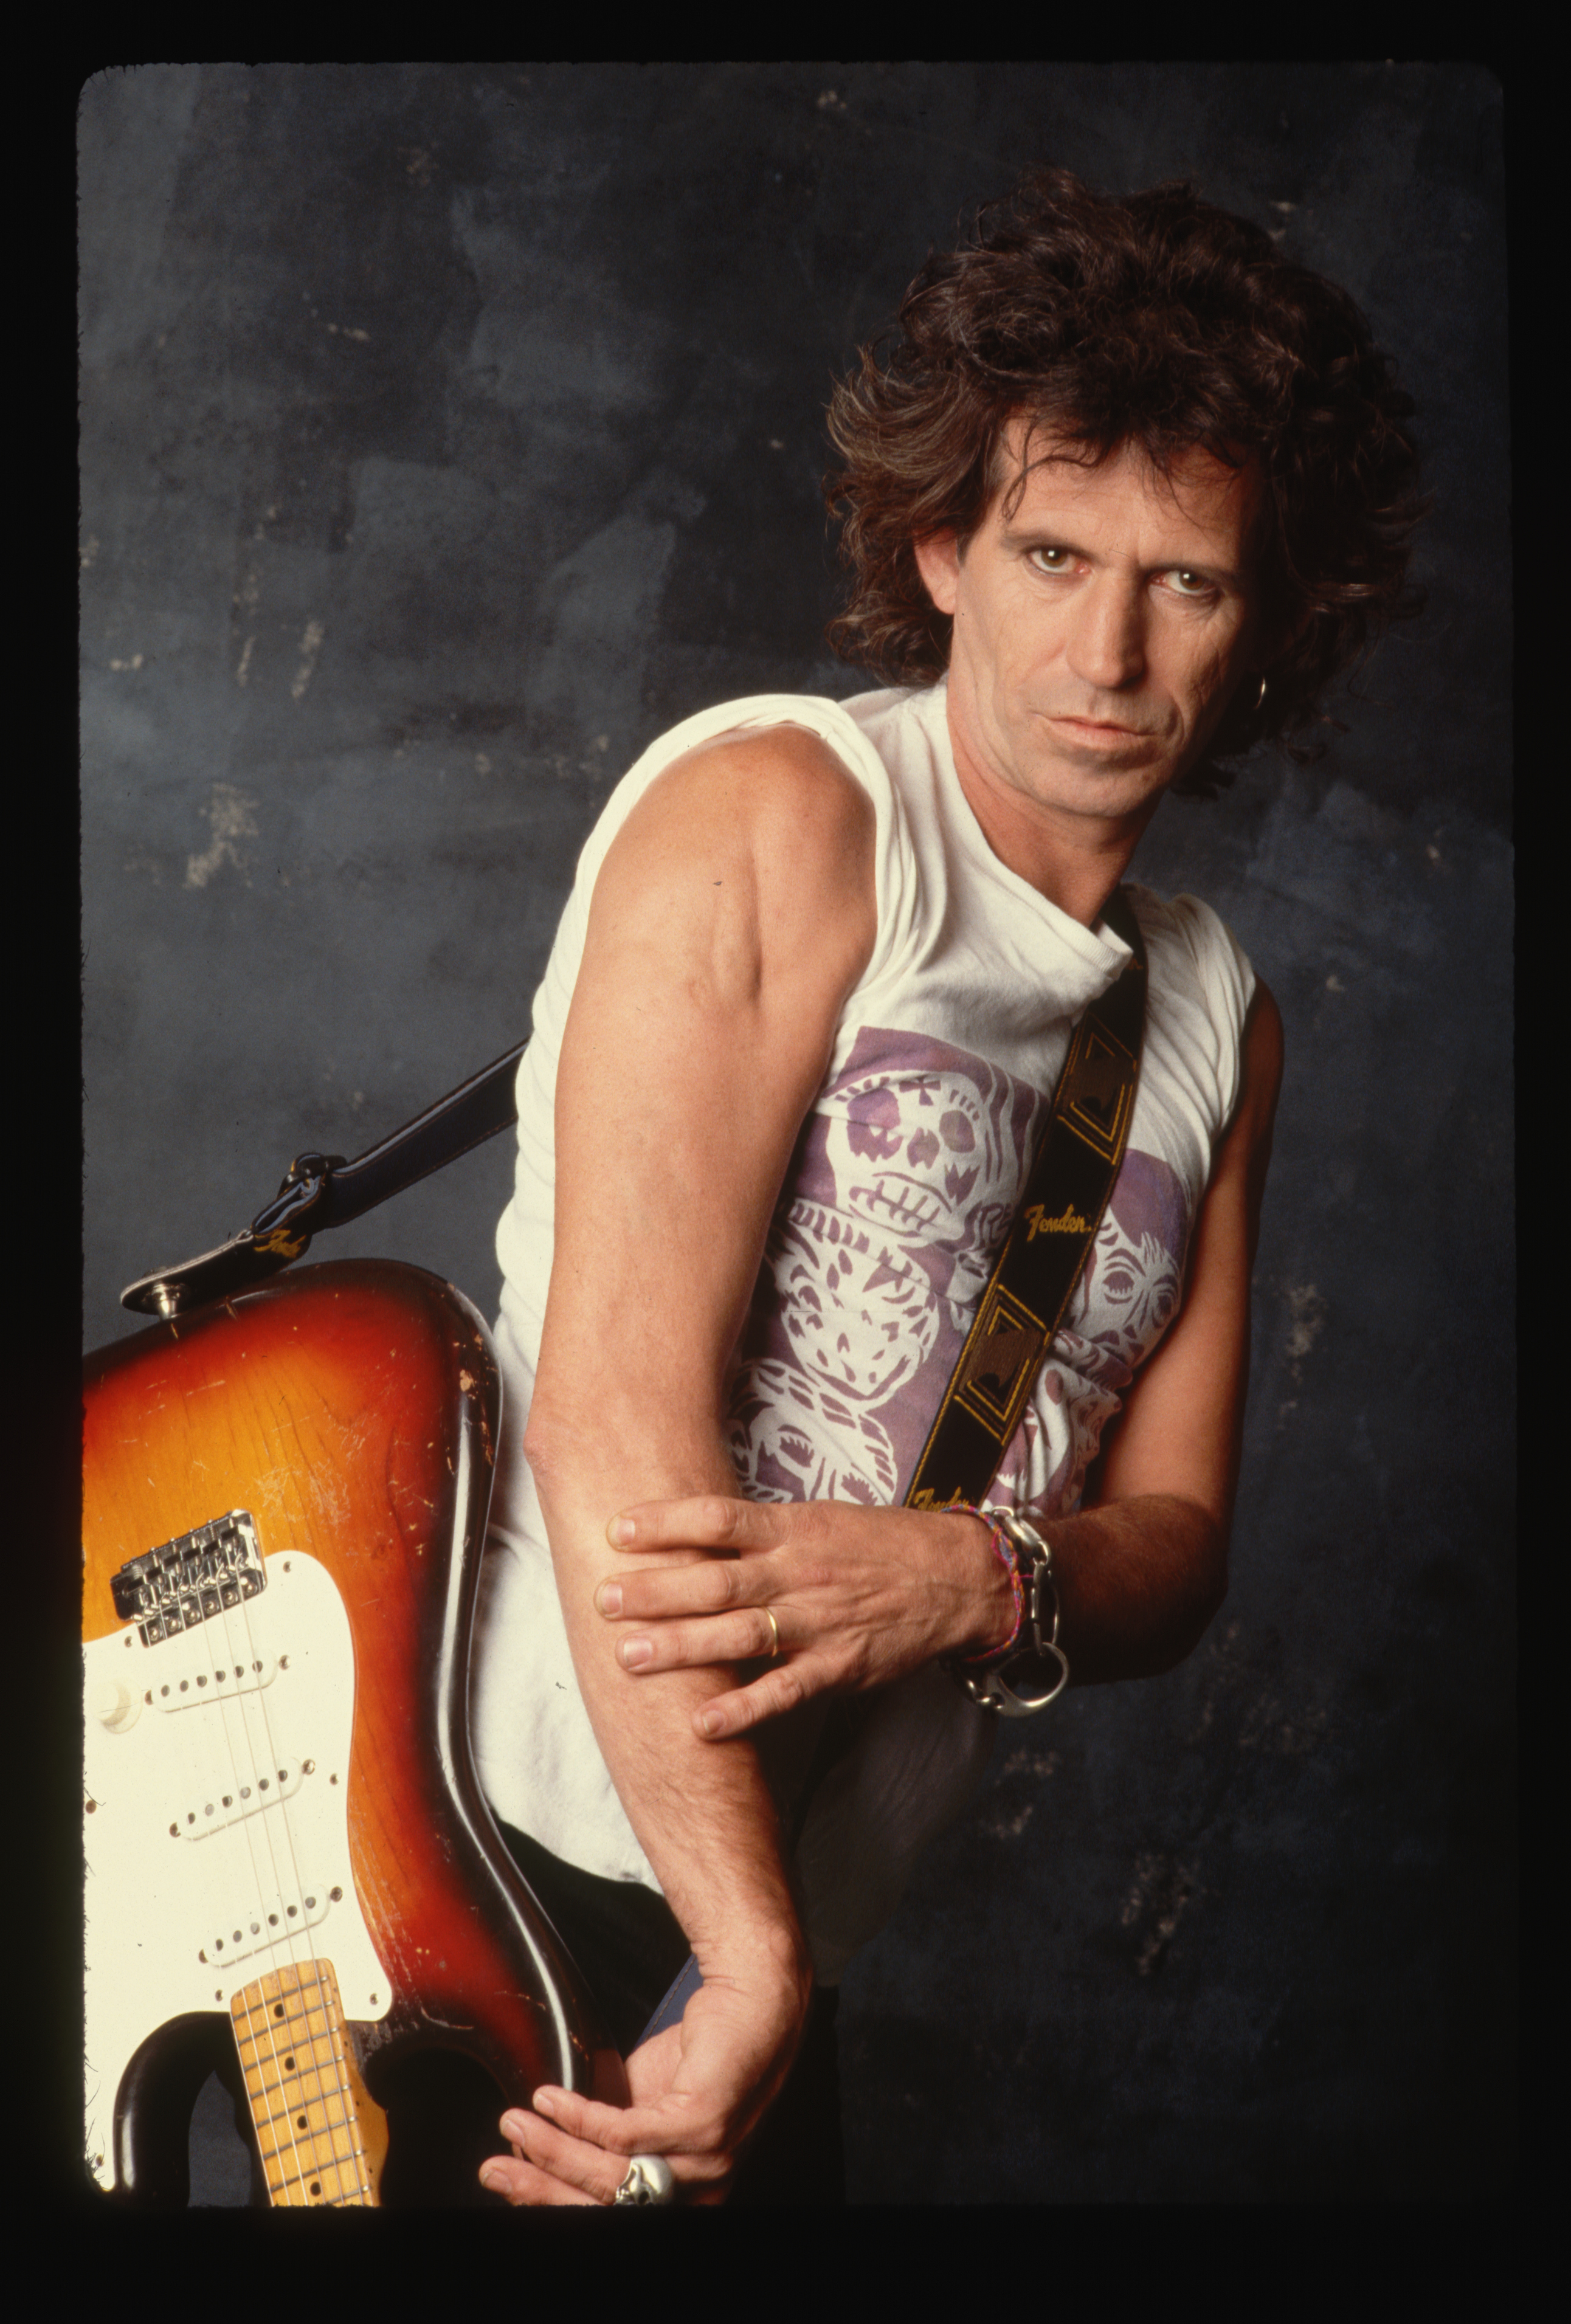 Keith Richards: Our 1985 Cover Story, <i></p>
<p><b>What changes have you seen the Stones go through personally?</b></p>
<p>I’ve seen ’em go through just about every damn thing. For ten years, or at least for five years, undoubtedly, I was the weak link in the chain. From my point of view, no way. But I was, in retrospect, in no condition to judge. That’s the horrible, terrible fascination of dope. That when you’re on it, everything’s cool. And the more you take it, the more cool it is, and the more necessary it is to be cool. It’s only in retrospect that you’re able to say, “Ah, this boy, you been led astray.”</p>
<p>When all is said and done, I’m either damn lucky or, as I like to kid myself, real smart that I didn’t manage to top myself in that period. After all, the only thing I was toppin’ the charts in then was One Most Likely to Kick the Bucket. And I held that position for several years. It’s one of my minor joys that I’m no longer on the last. <a href=